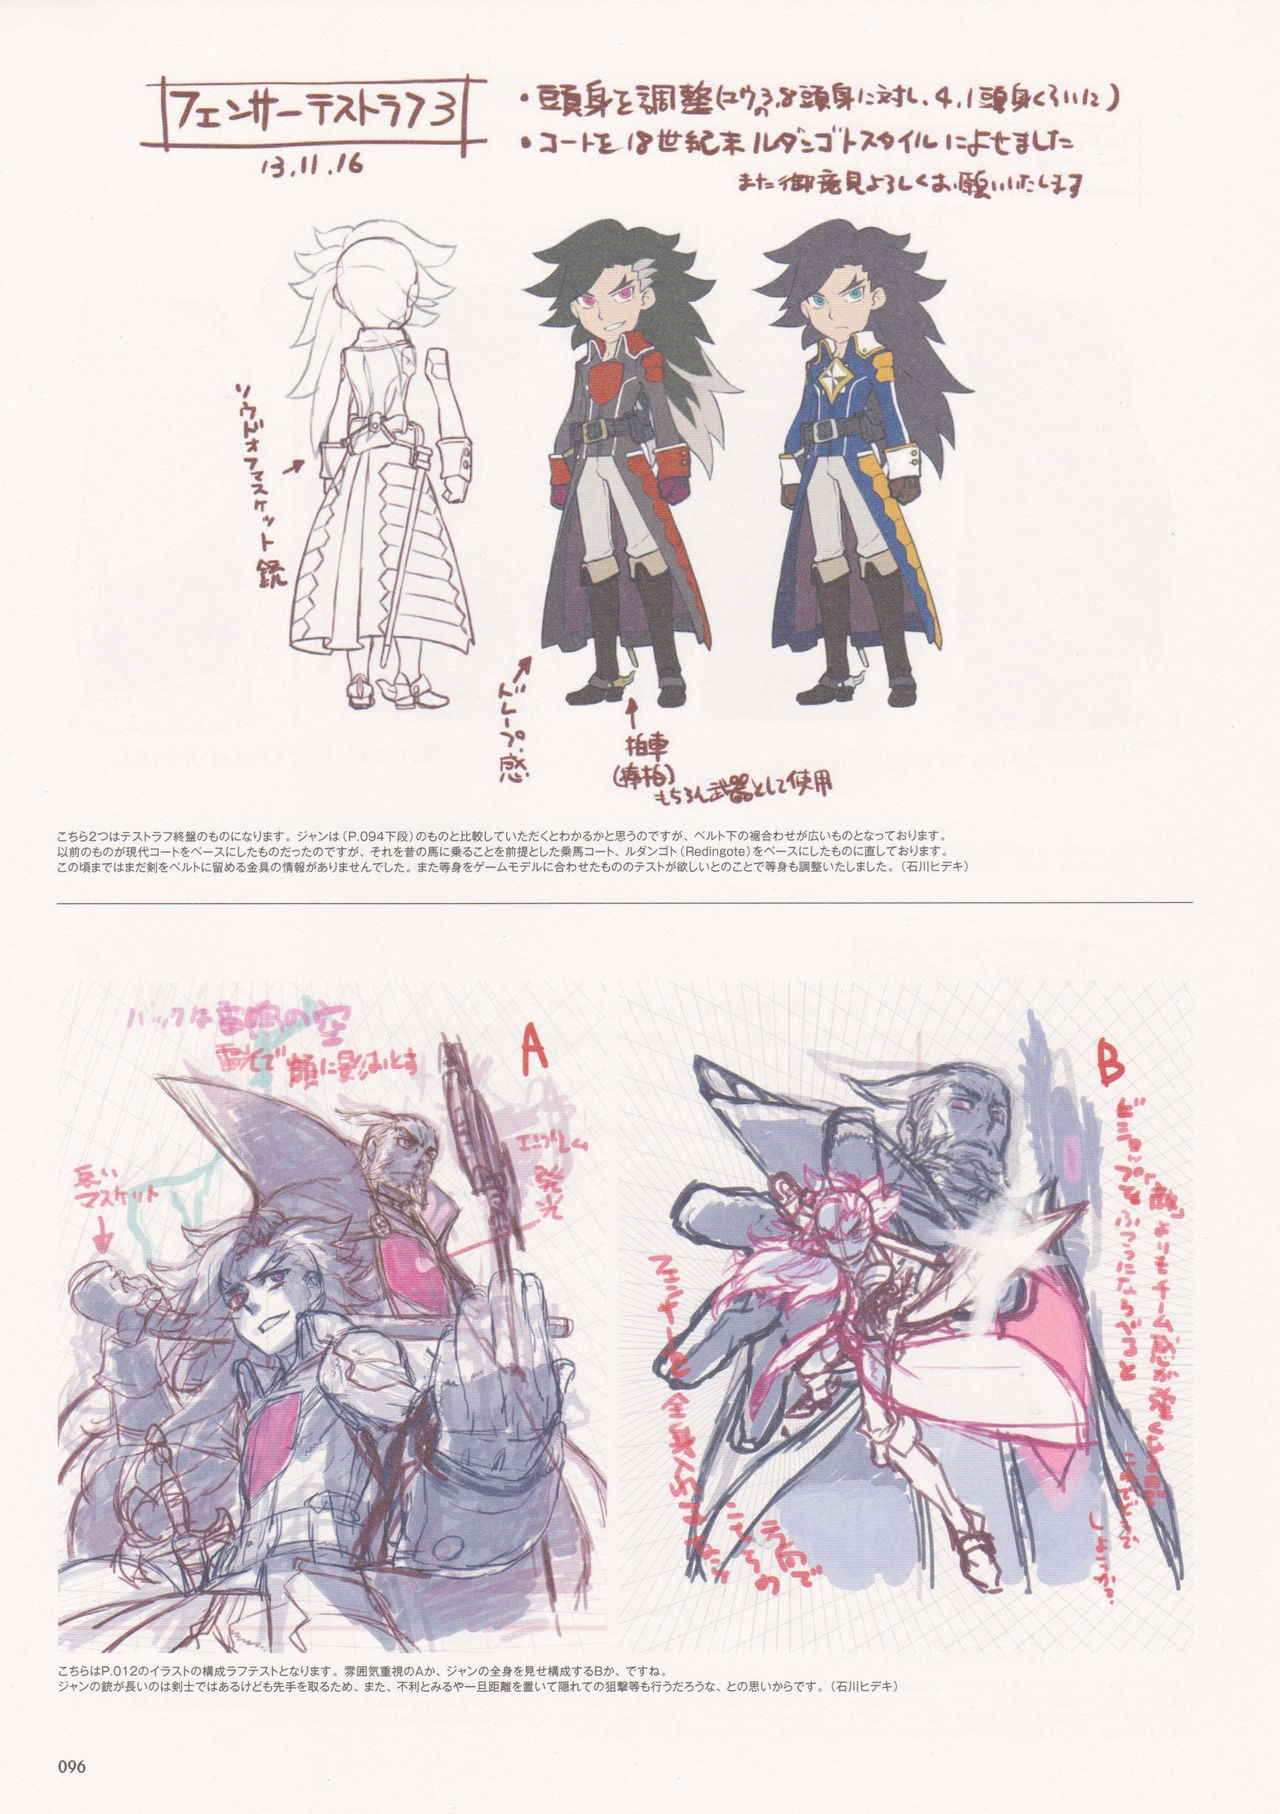 Bravely Second - End Layer - Design Works THE ART OF BRAVELY 2013-2015 96